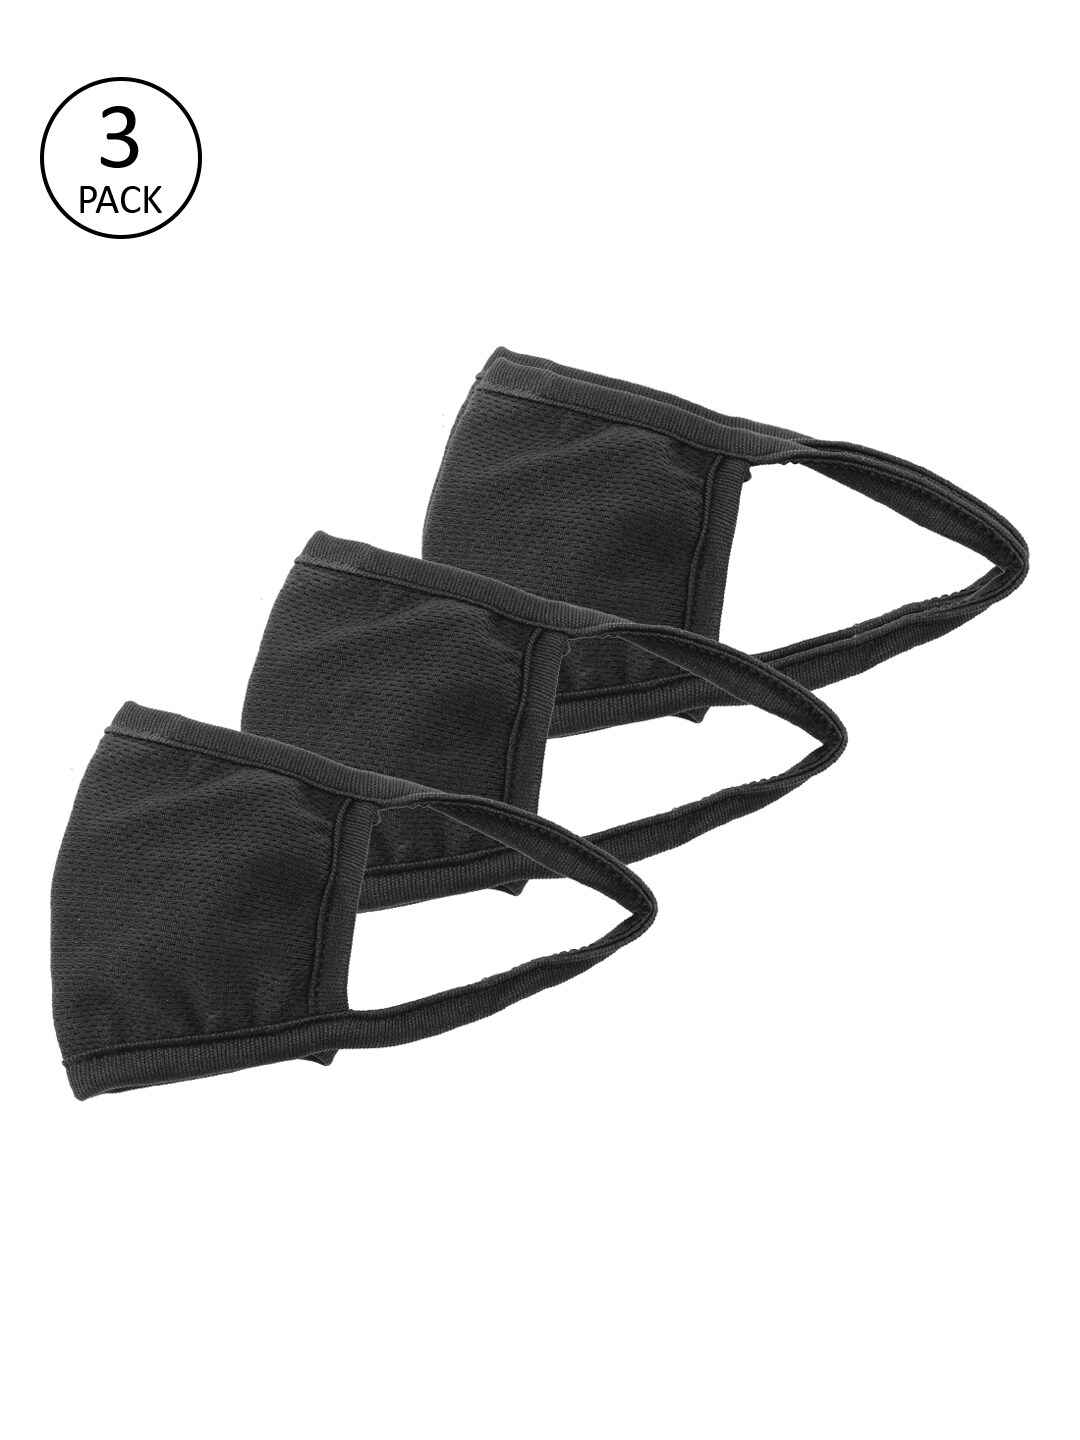 Carlton London Unisex Black Pack Of 3 3-Ply Reusable Mask Price in India